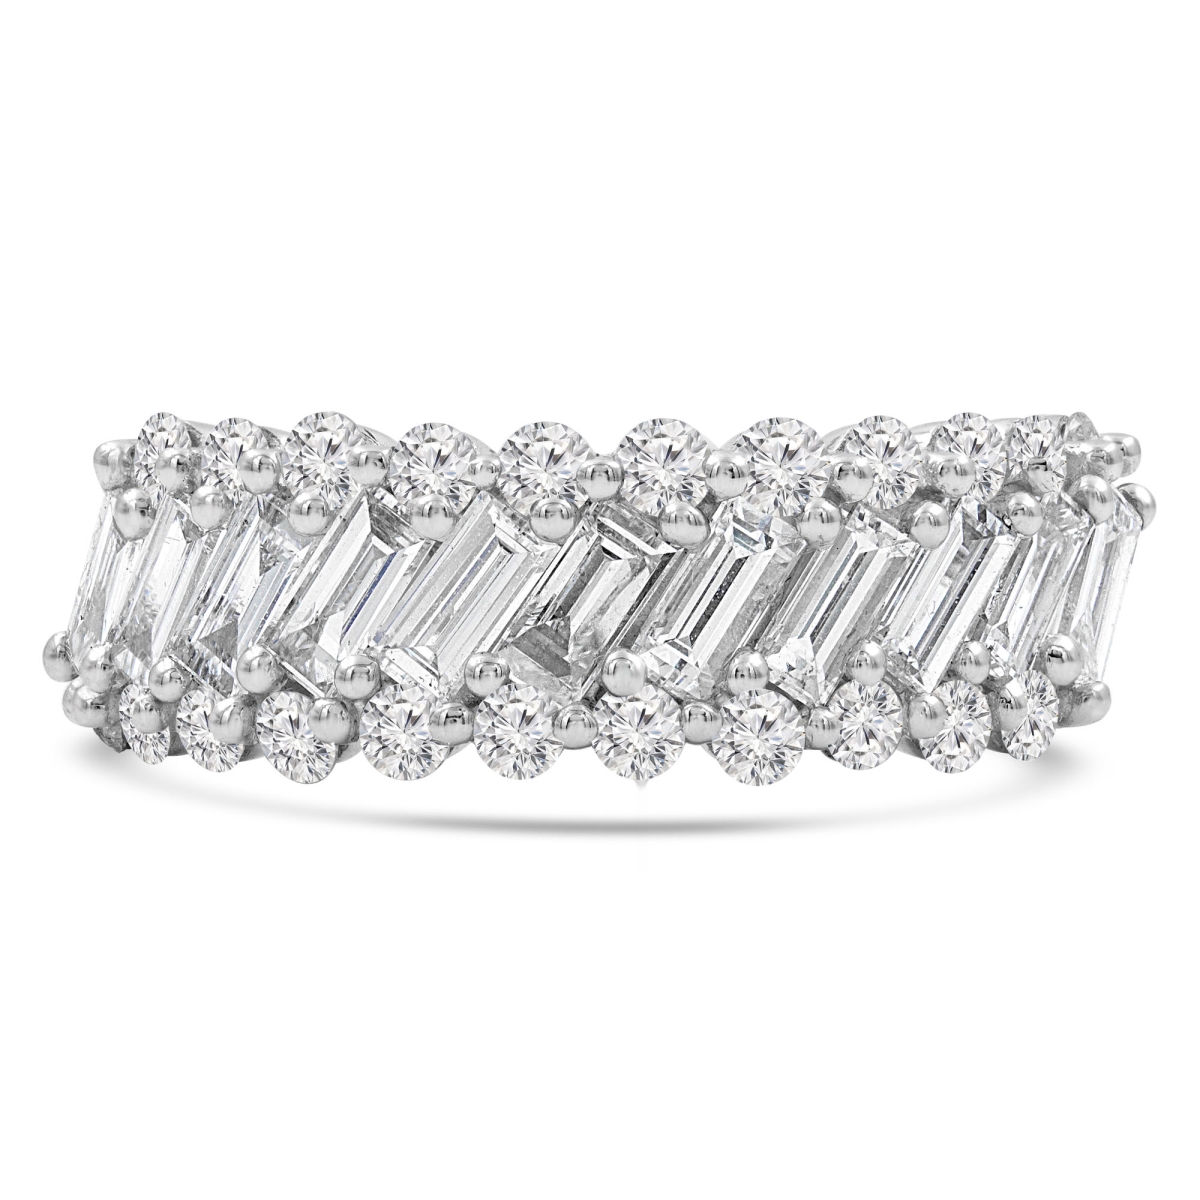 Picture of Majesty Diamonds MD210236-3.5 1.6 CTW Baguette Diamond Three-Row Cocktail Anniversary Band Ring in 18K White Gold - Size 3.5